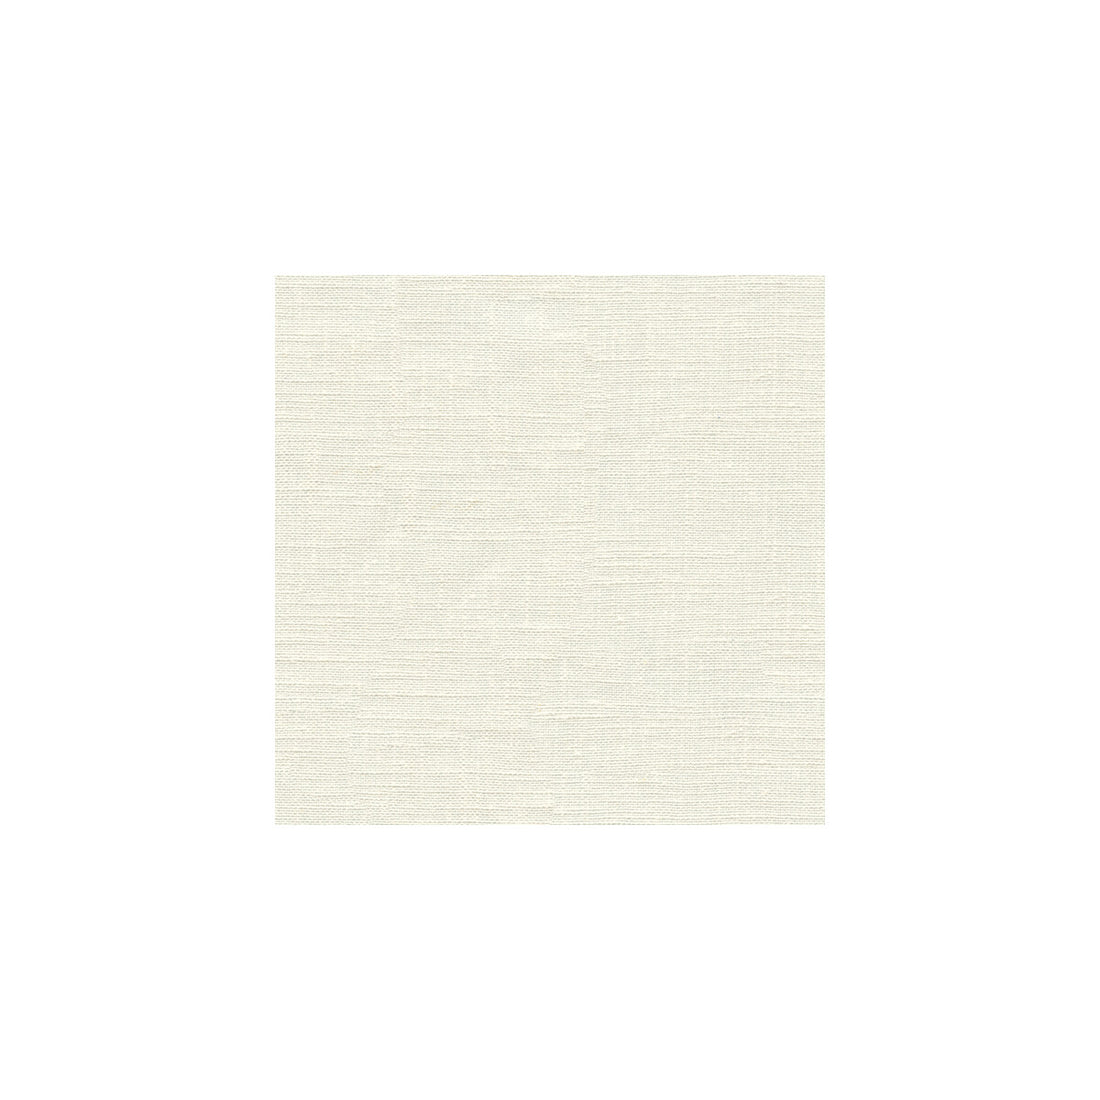 Kravet Basics fabric in 32305-1 color - pattern 32305.1.0 - by Kravet Basics in the Perfect Plains collection